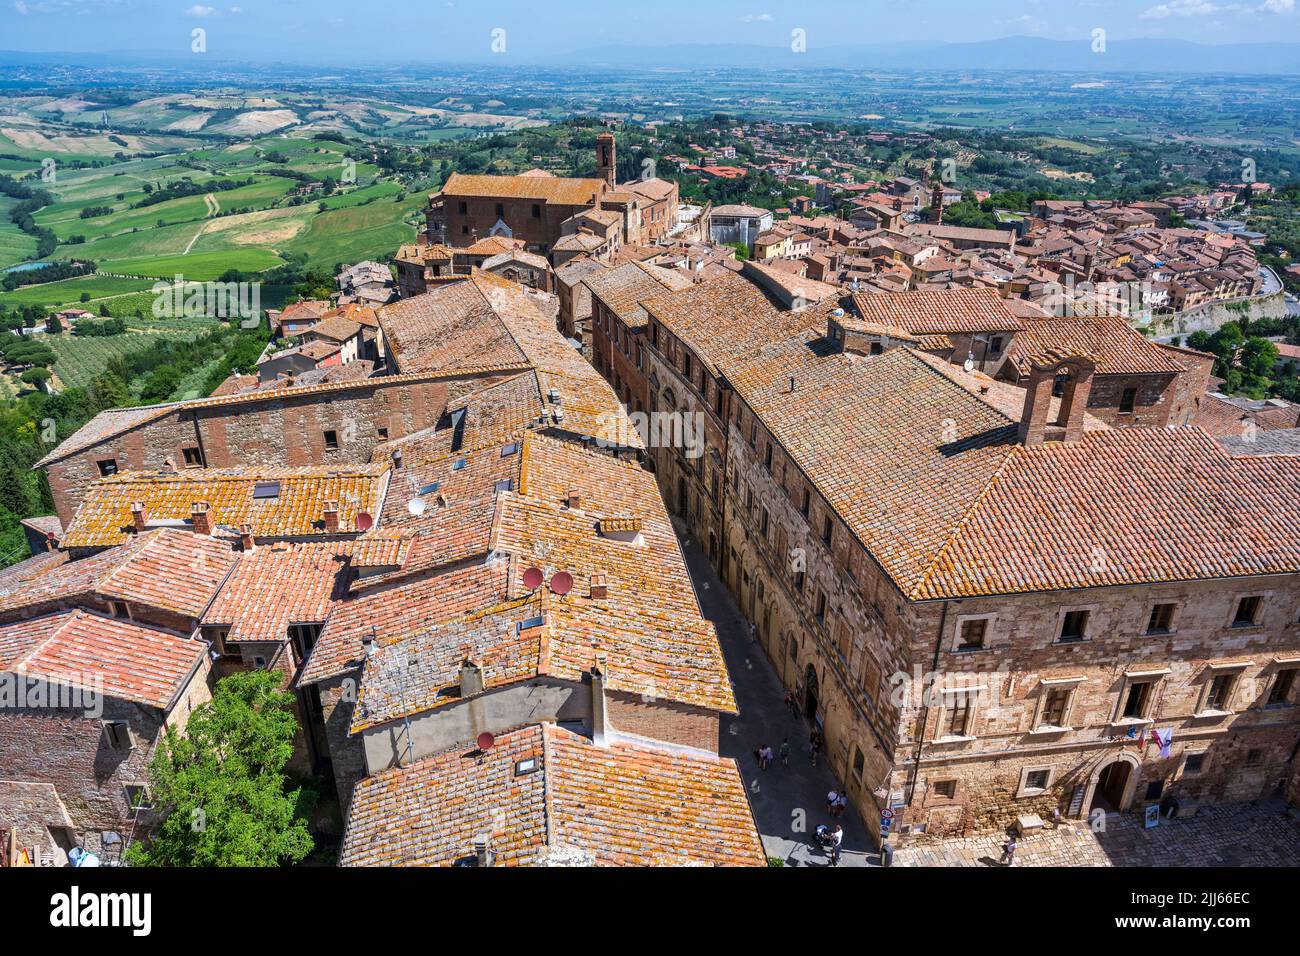 View across rooftops looking down Via Ricci to the lower town in the hilltop town of Montepulciano in Tuscany, Italy Stock Photo